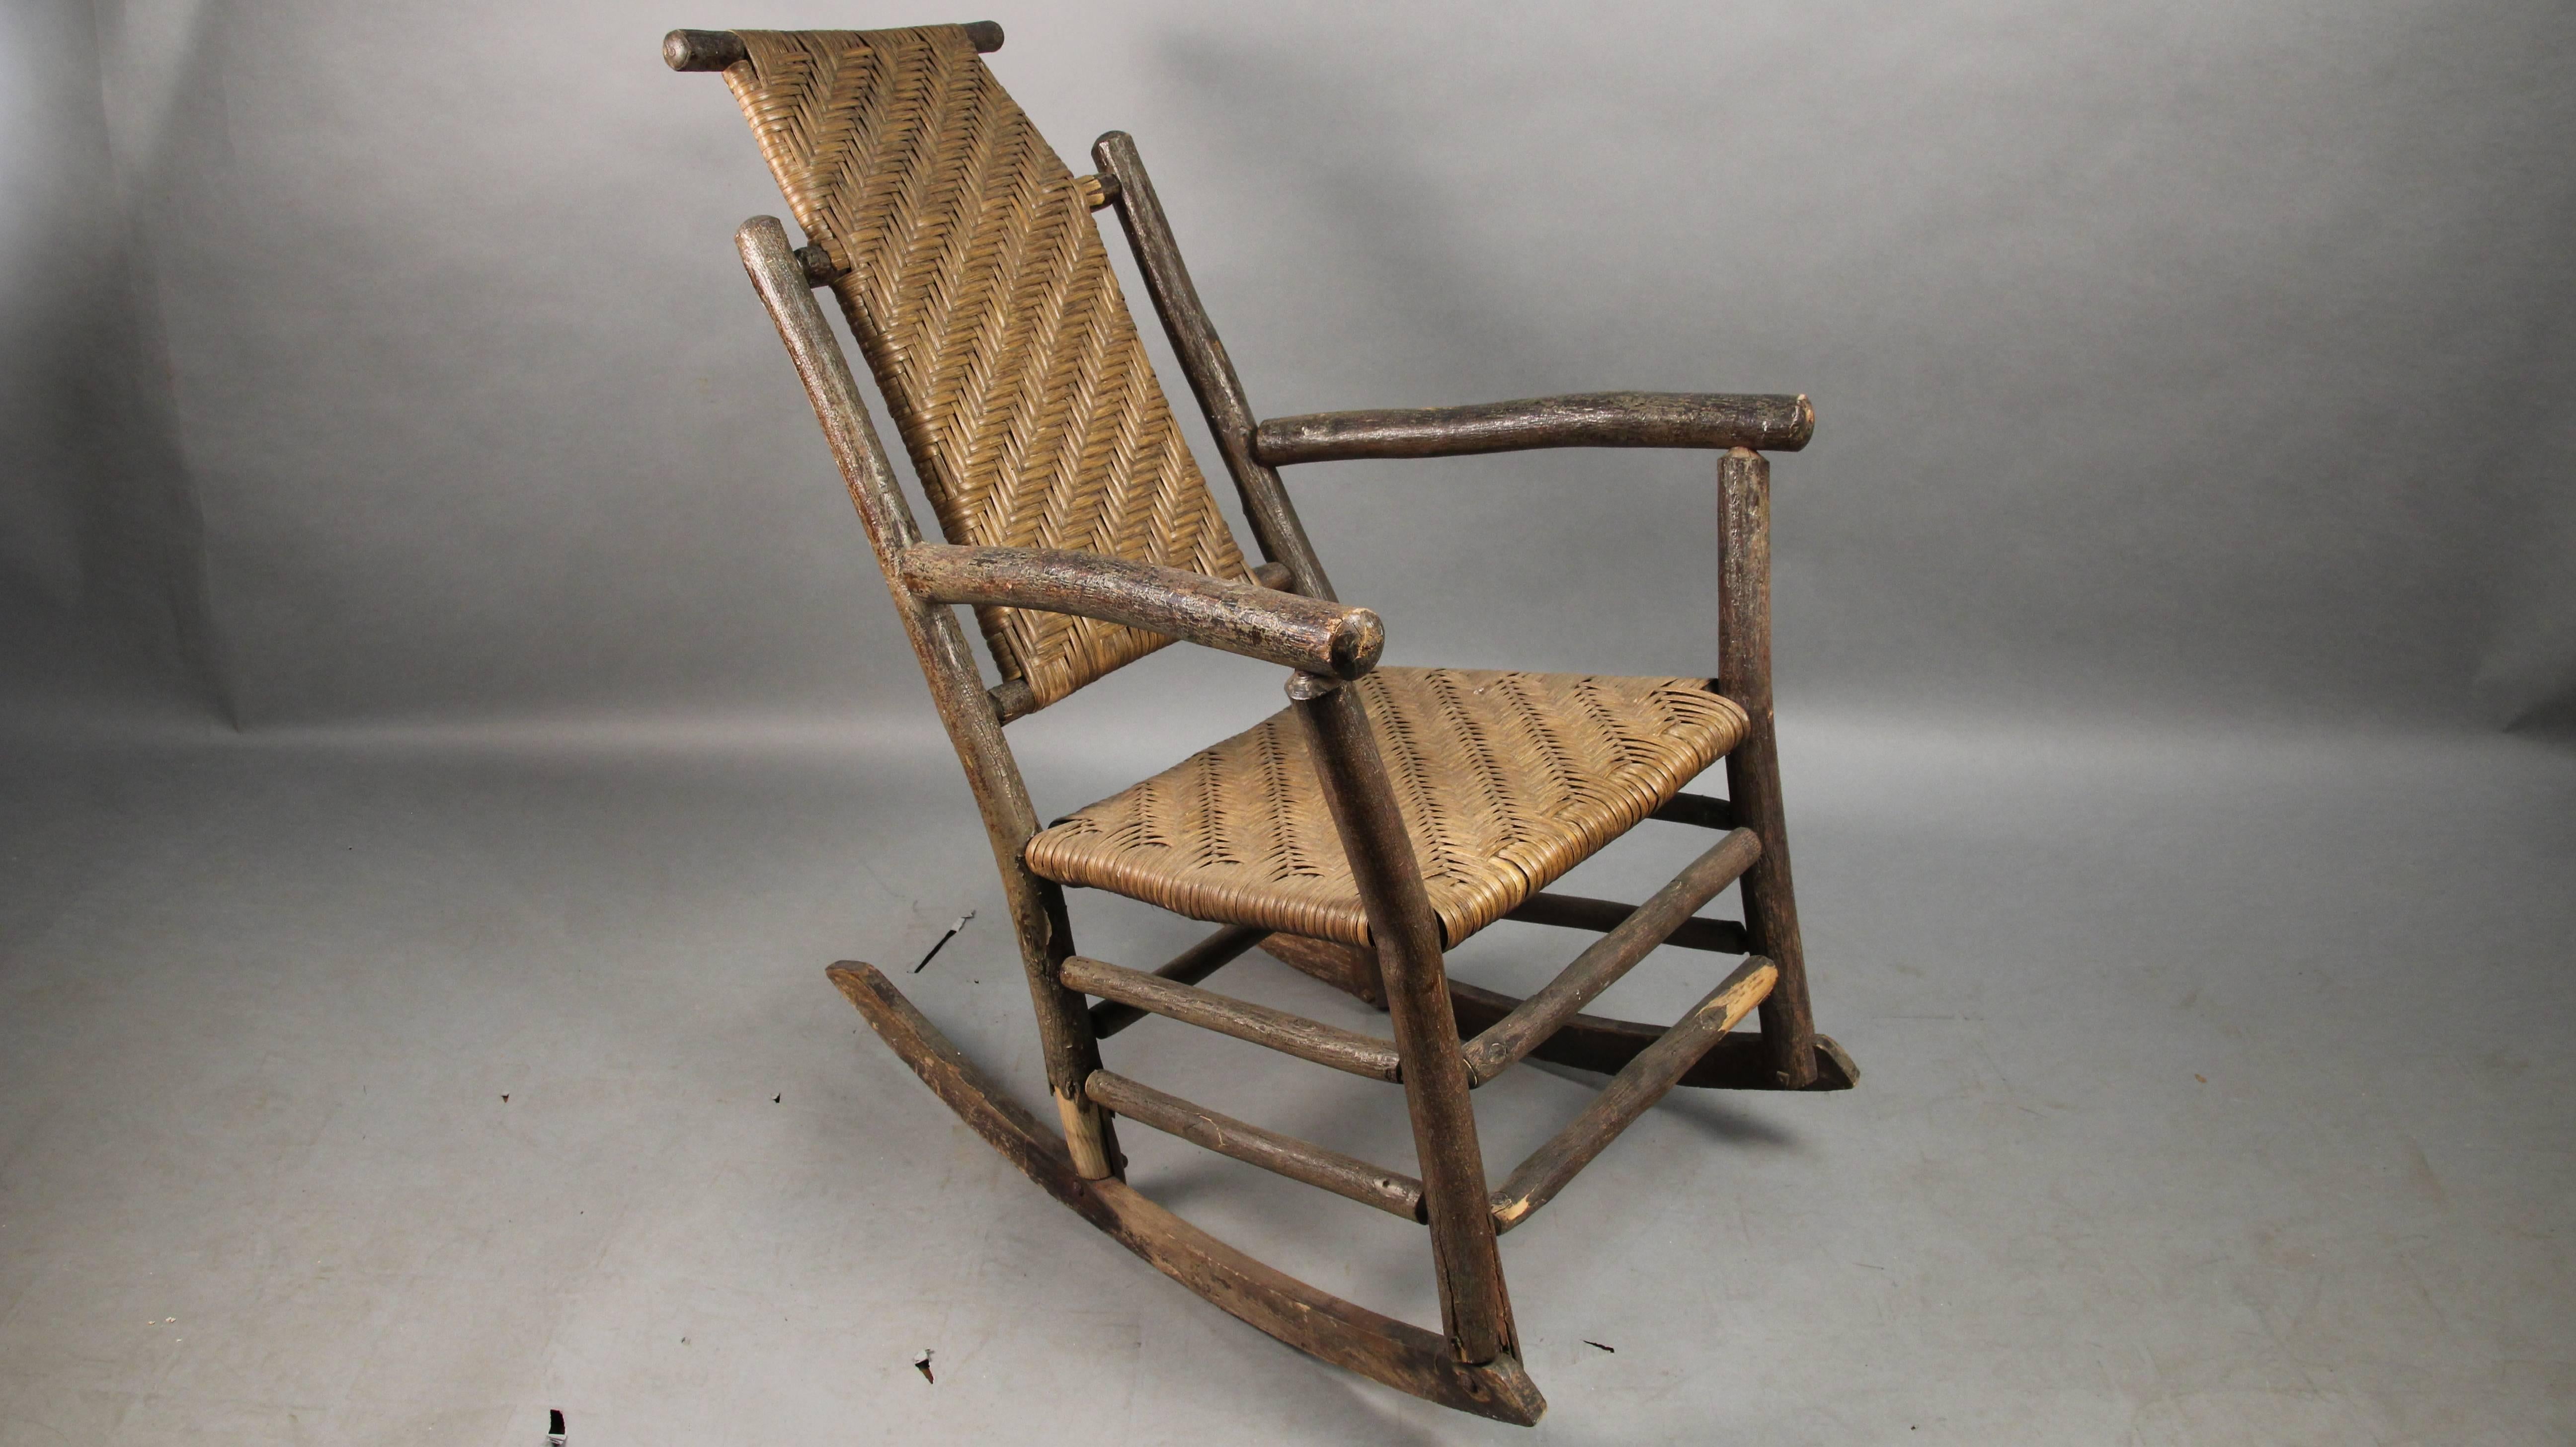 Hard to find all original Old Hickory rocker. Great original condition.